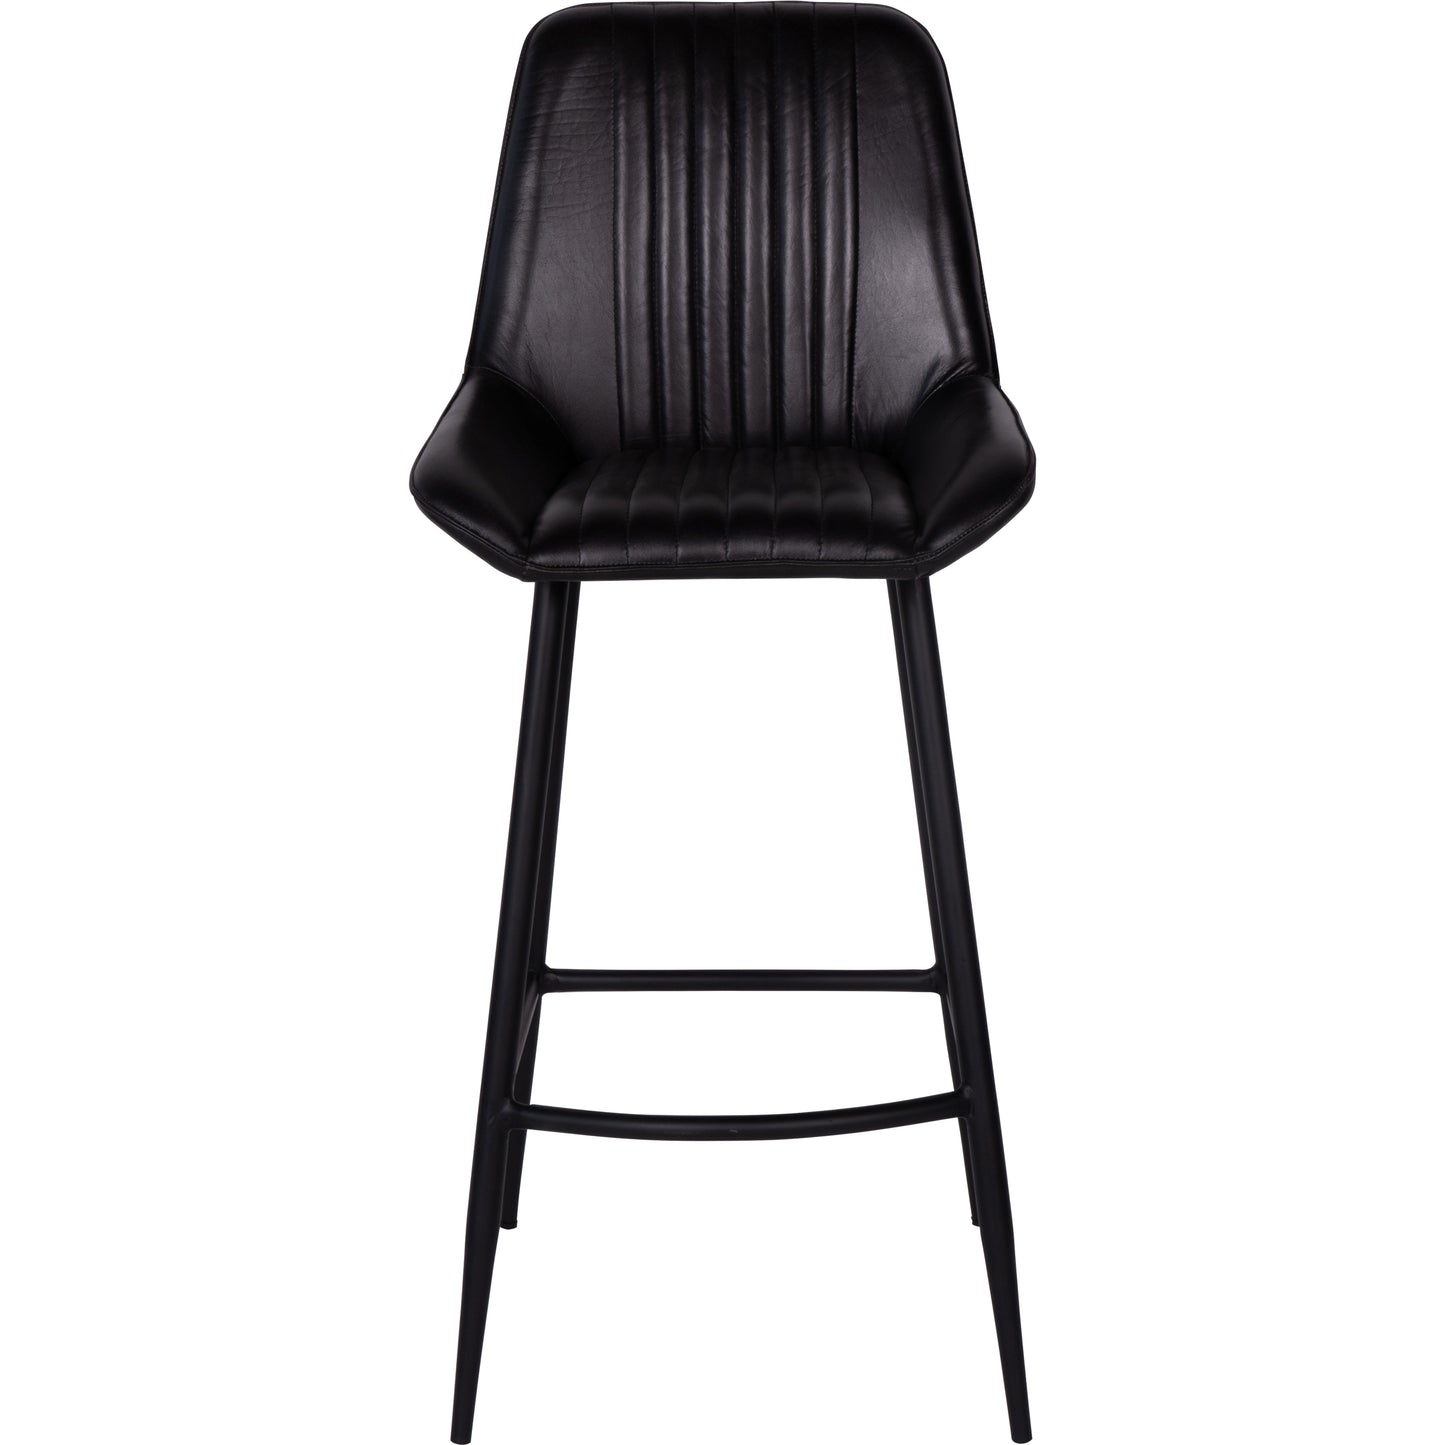 Pair of Charcoal Leather Pembroke Bar Stools